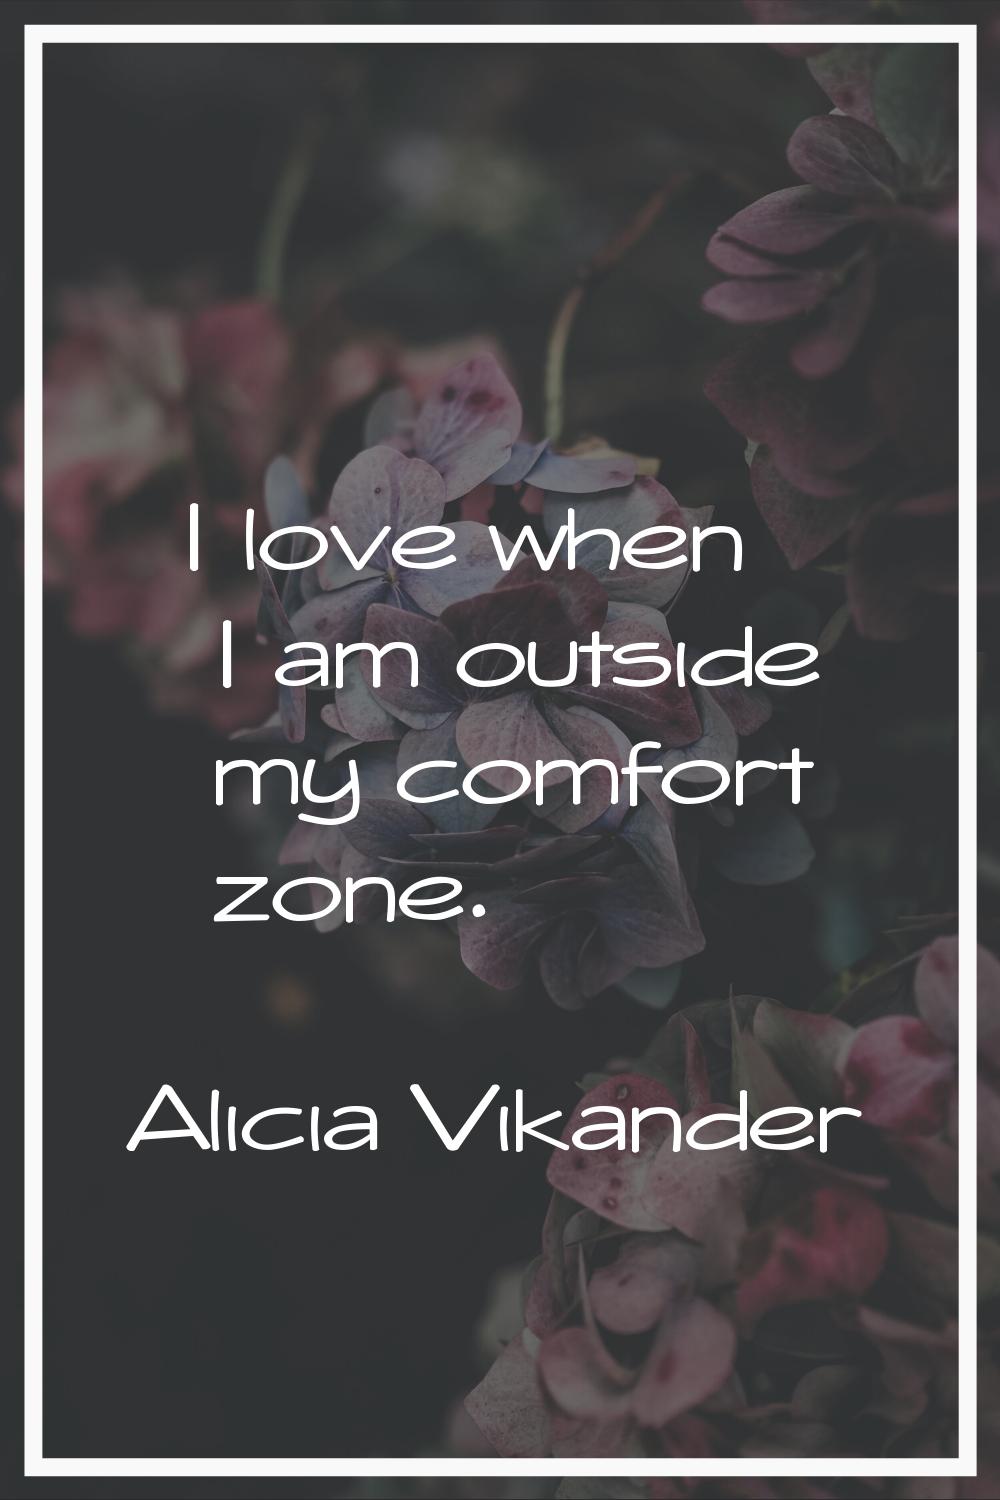 I love when I am outside my comfort zone.